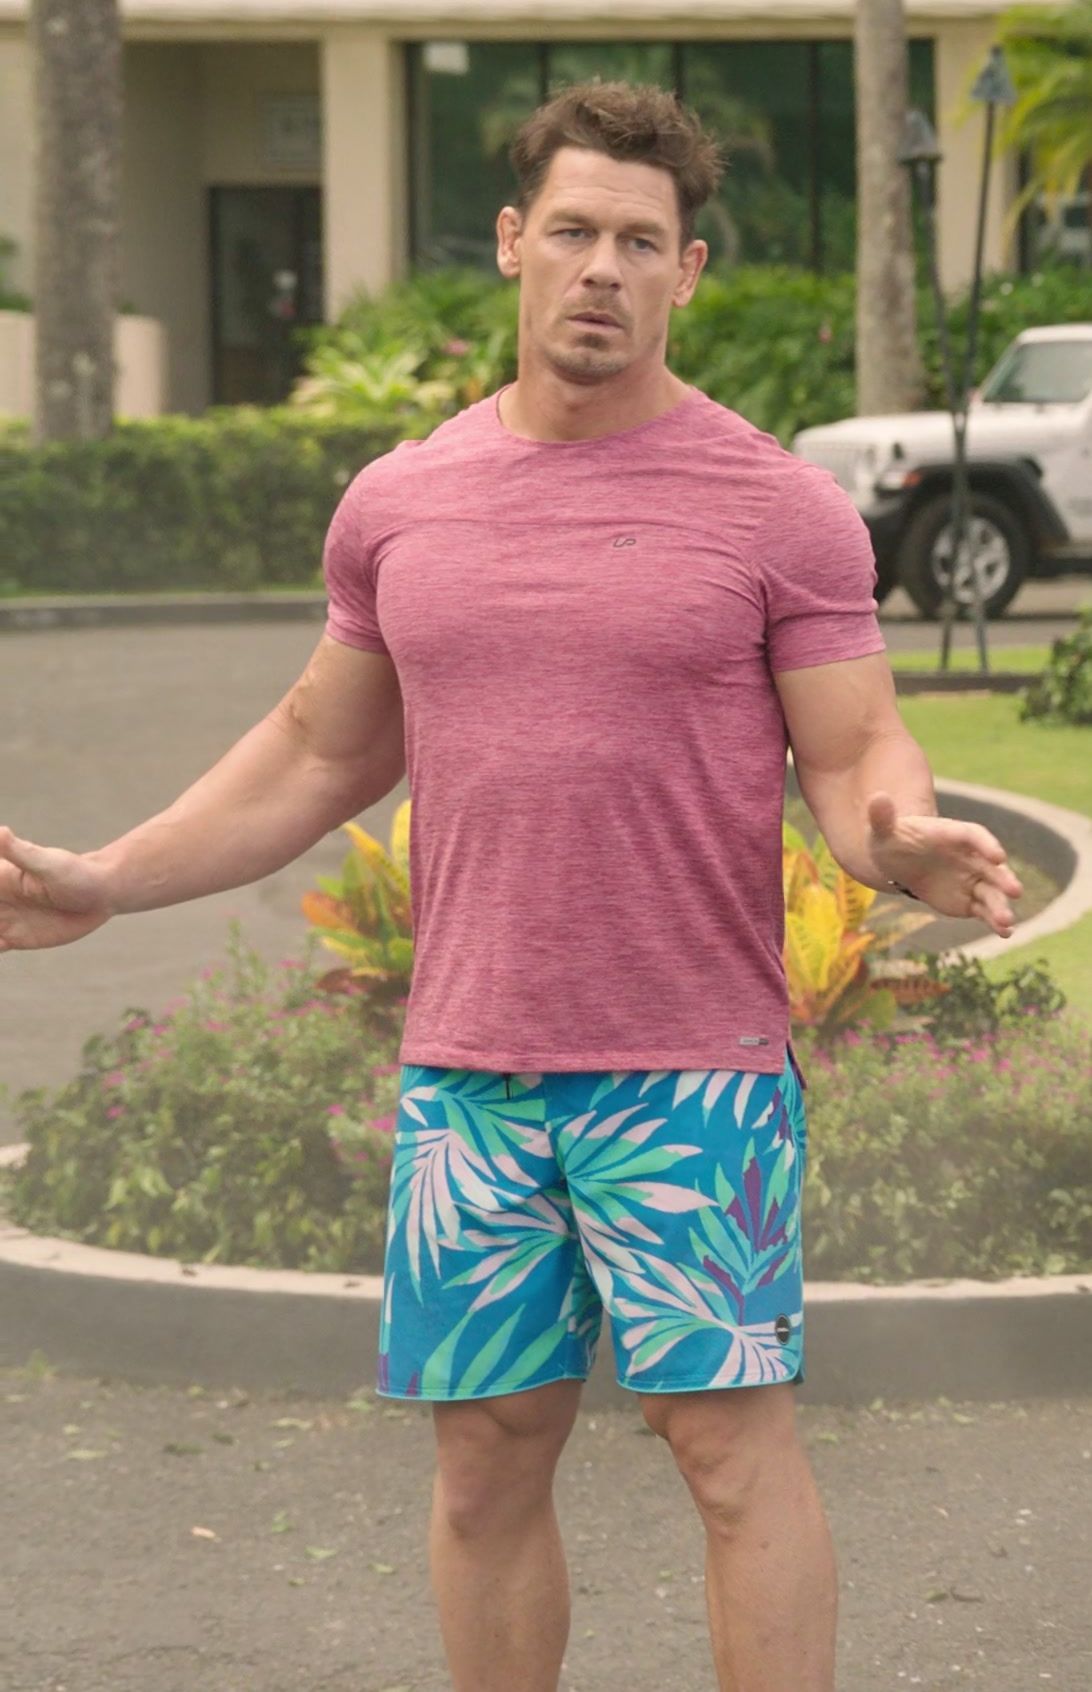 Worn on Vacation Friends 2 (2023) Movie - Blue Tropical Pattern Surf Board Shorts of John Cena as Ron